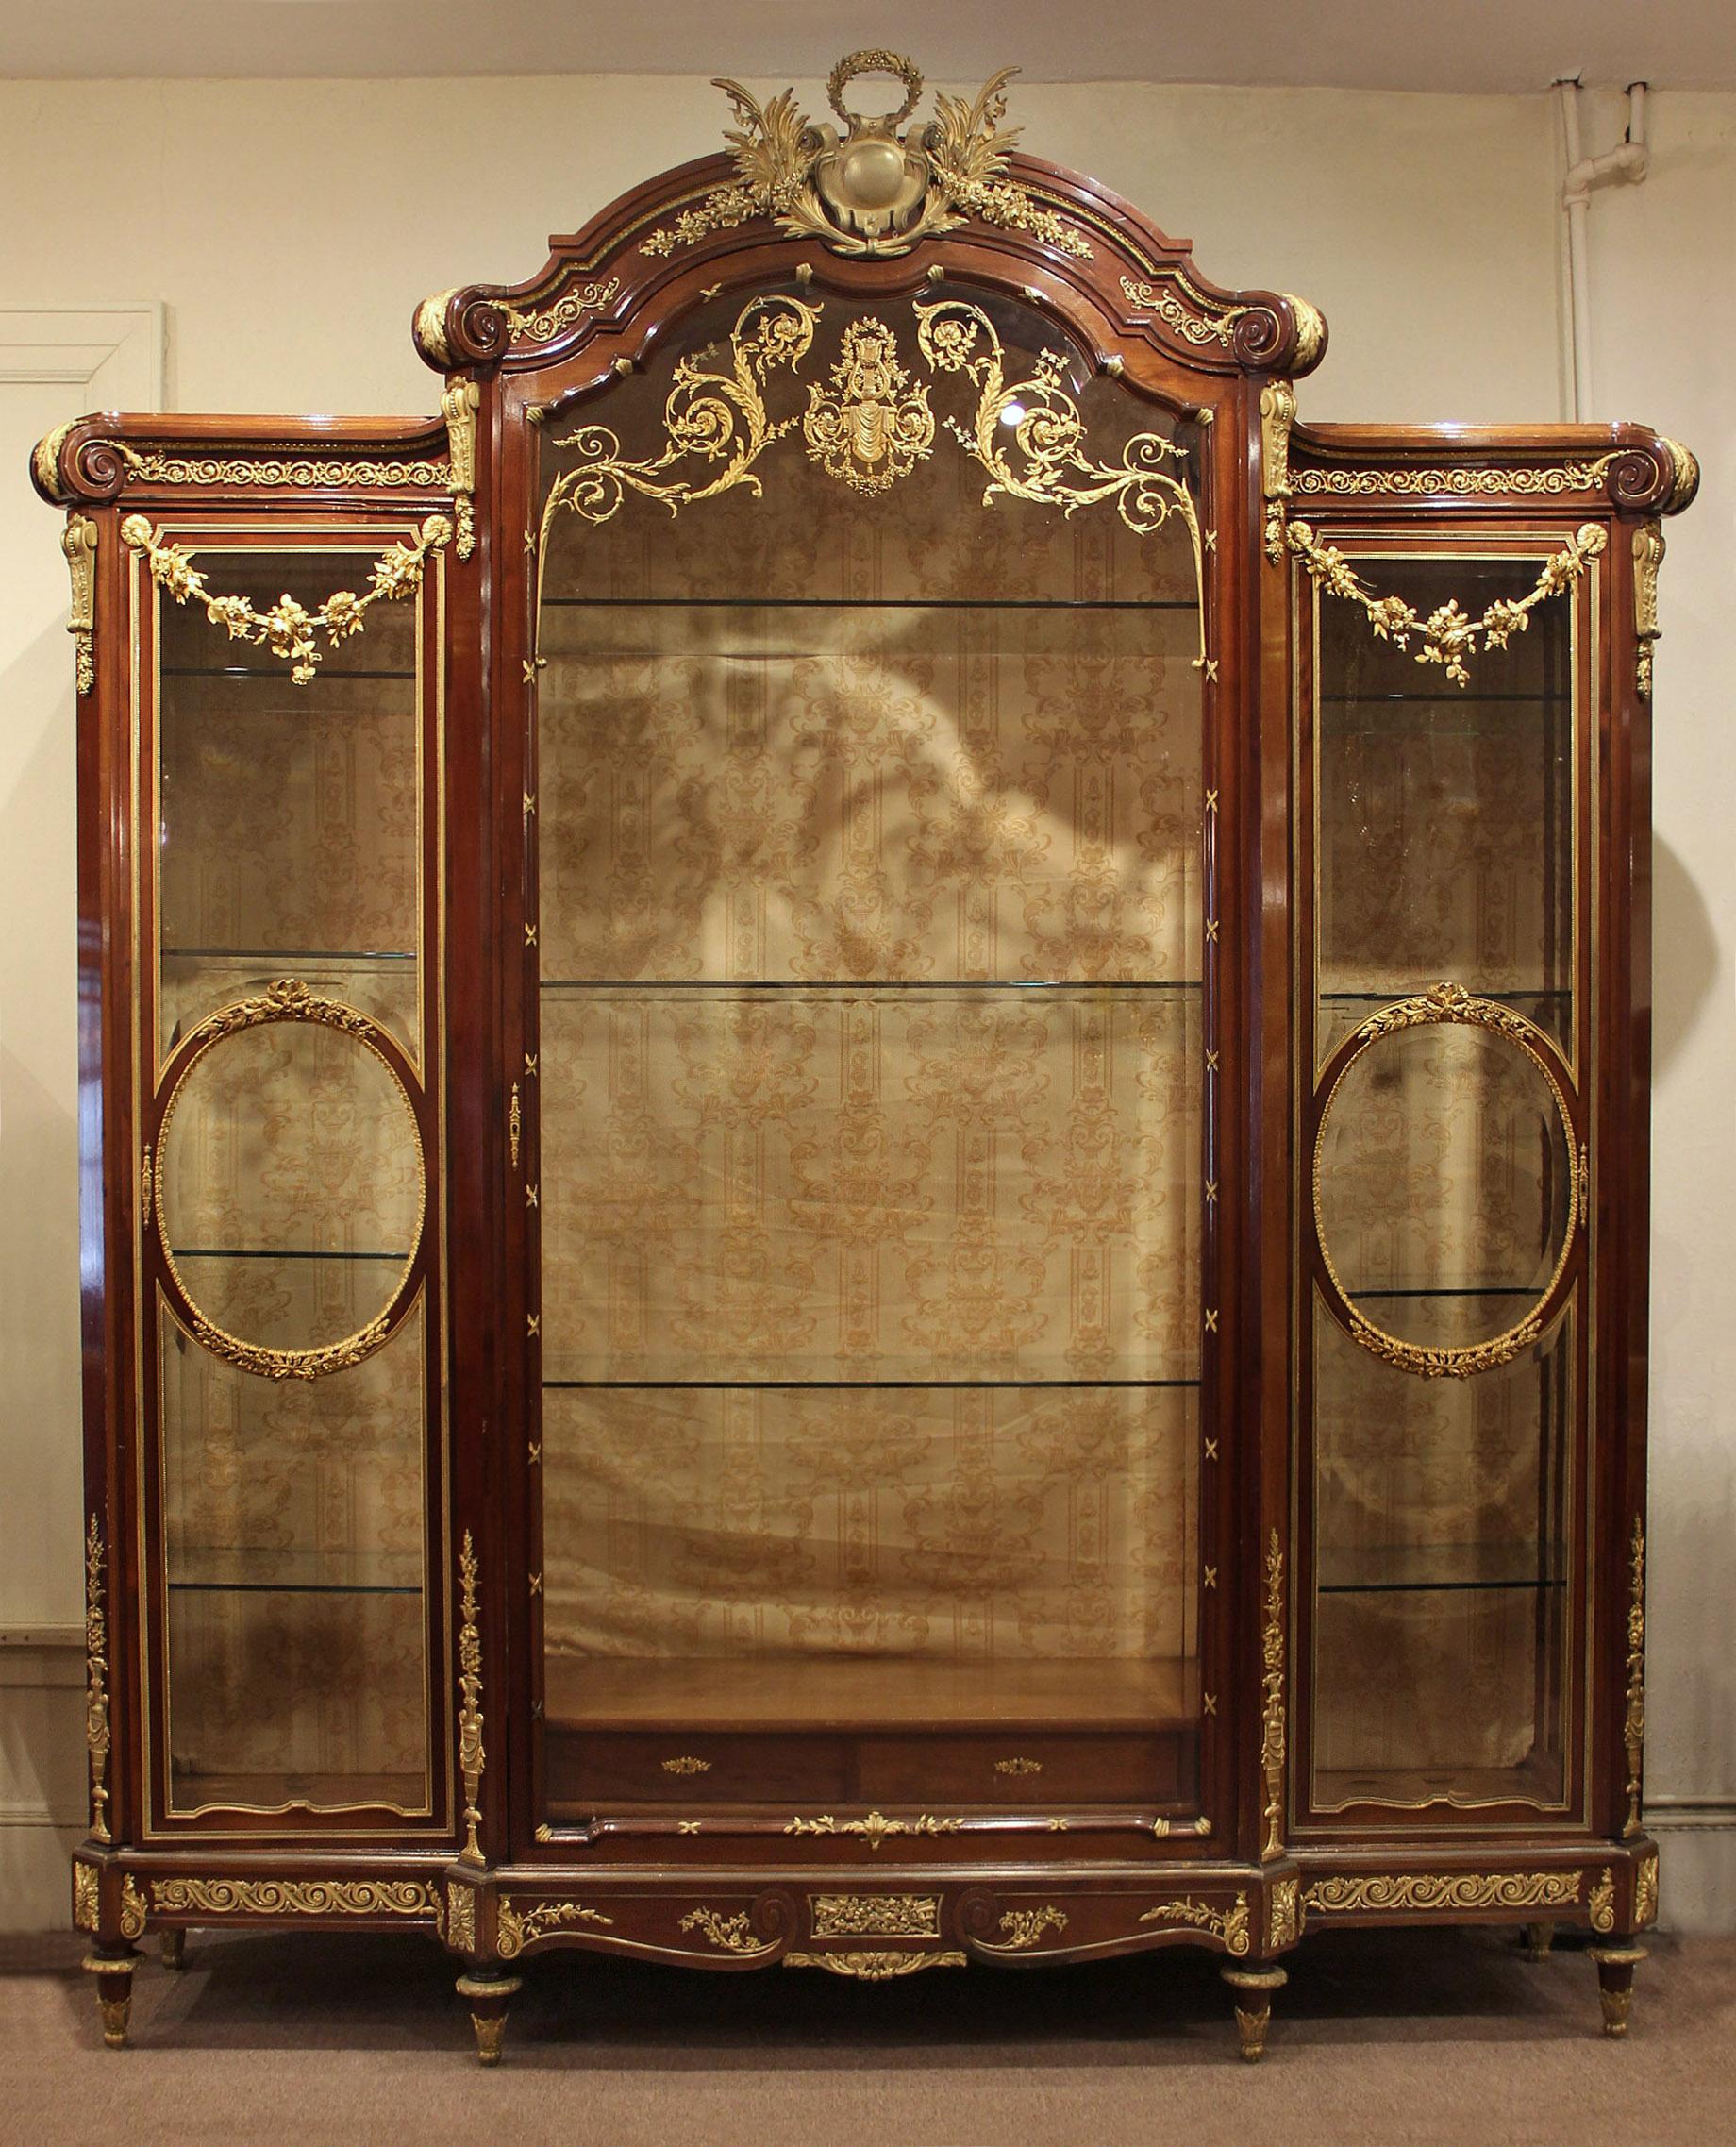 Belle Époque Palatial Early 20th Century Gilt Bronze Mounted Vitrine by François Linke For Sale